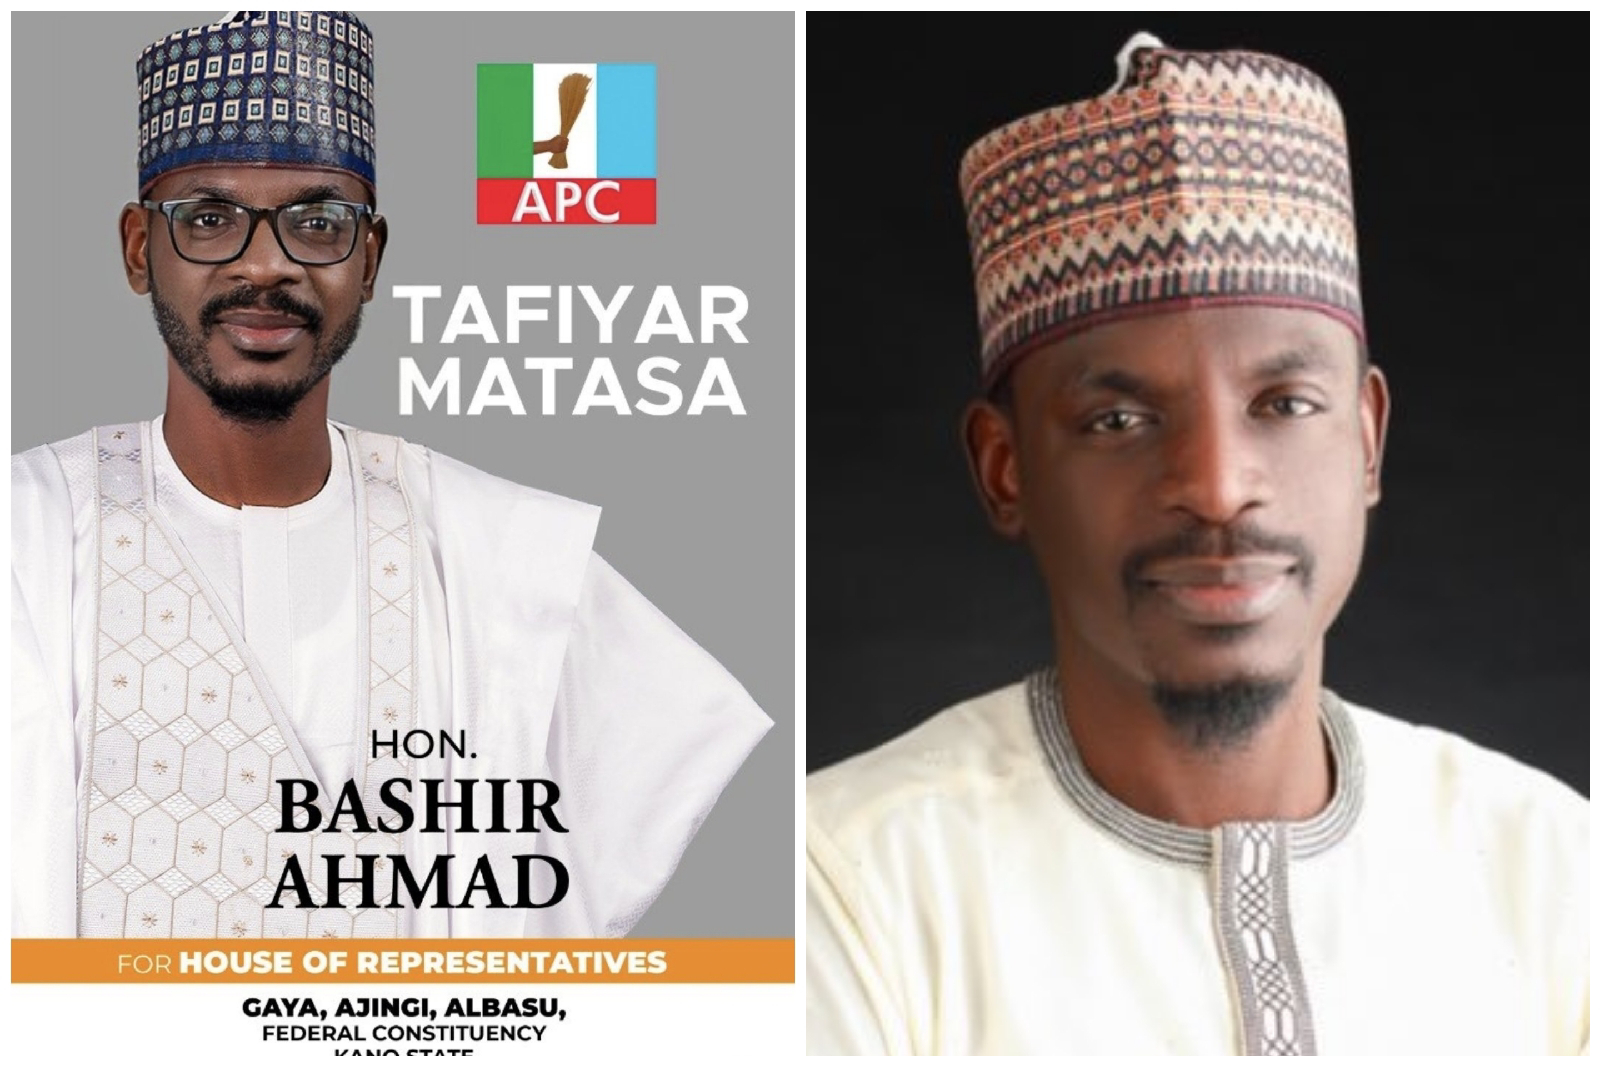 After losing, Buhari’s ex-aide, Bashir Ahmad, wants APC primary cancelled